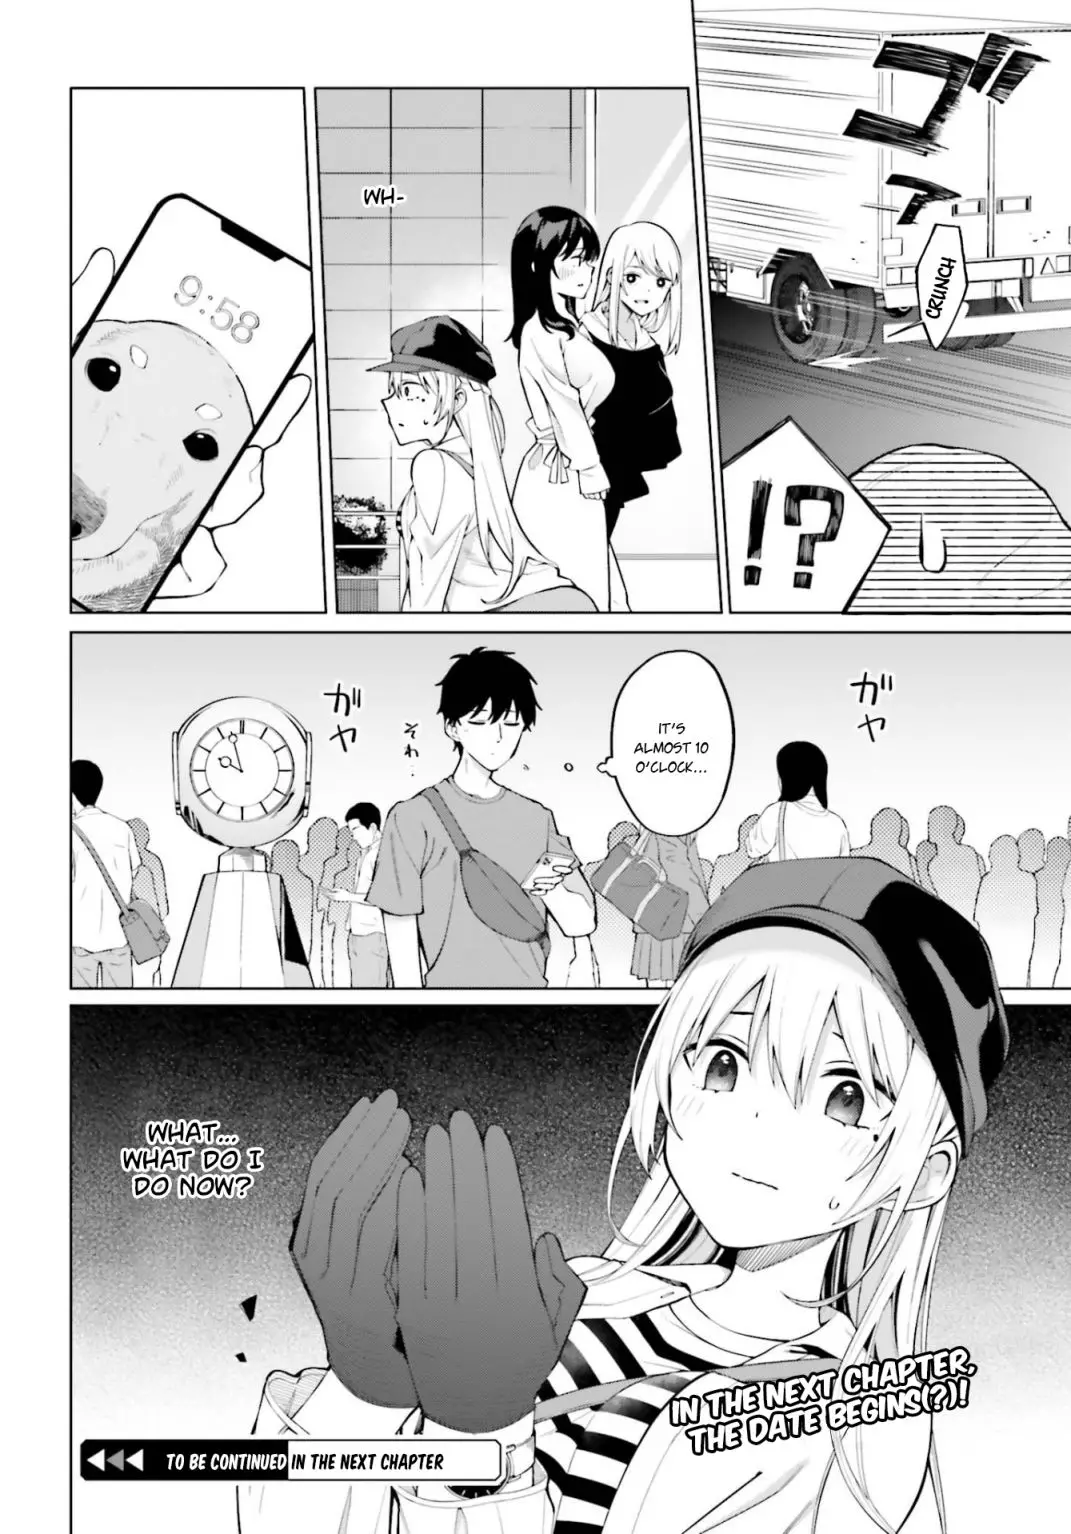 I Don't Understand Shirogane-San's Facial Expression At All - 9 page 25-659a0003